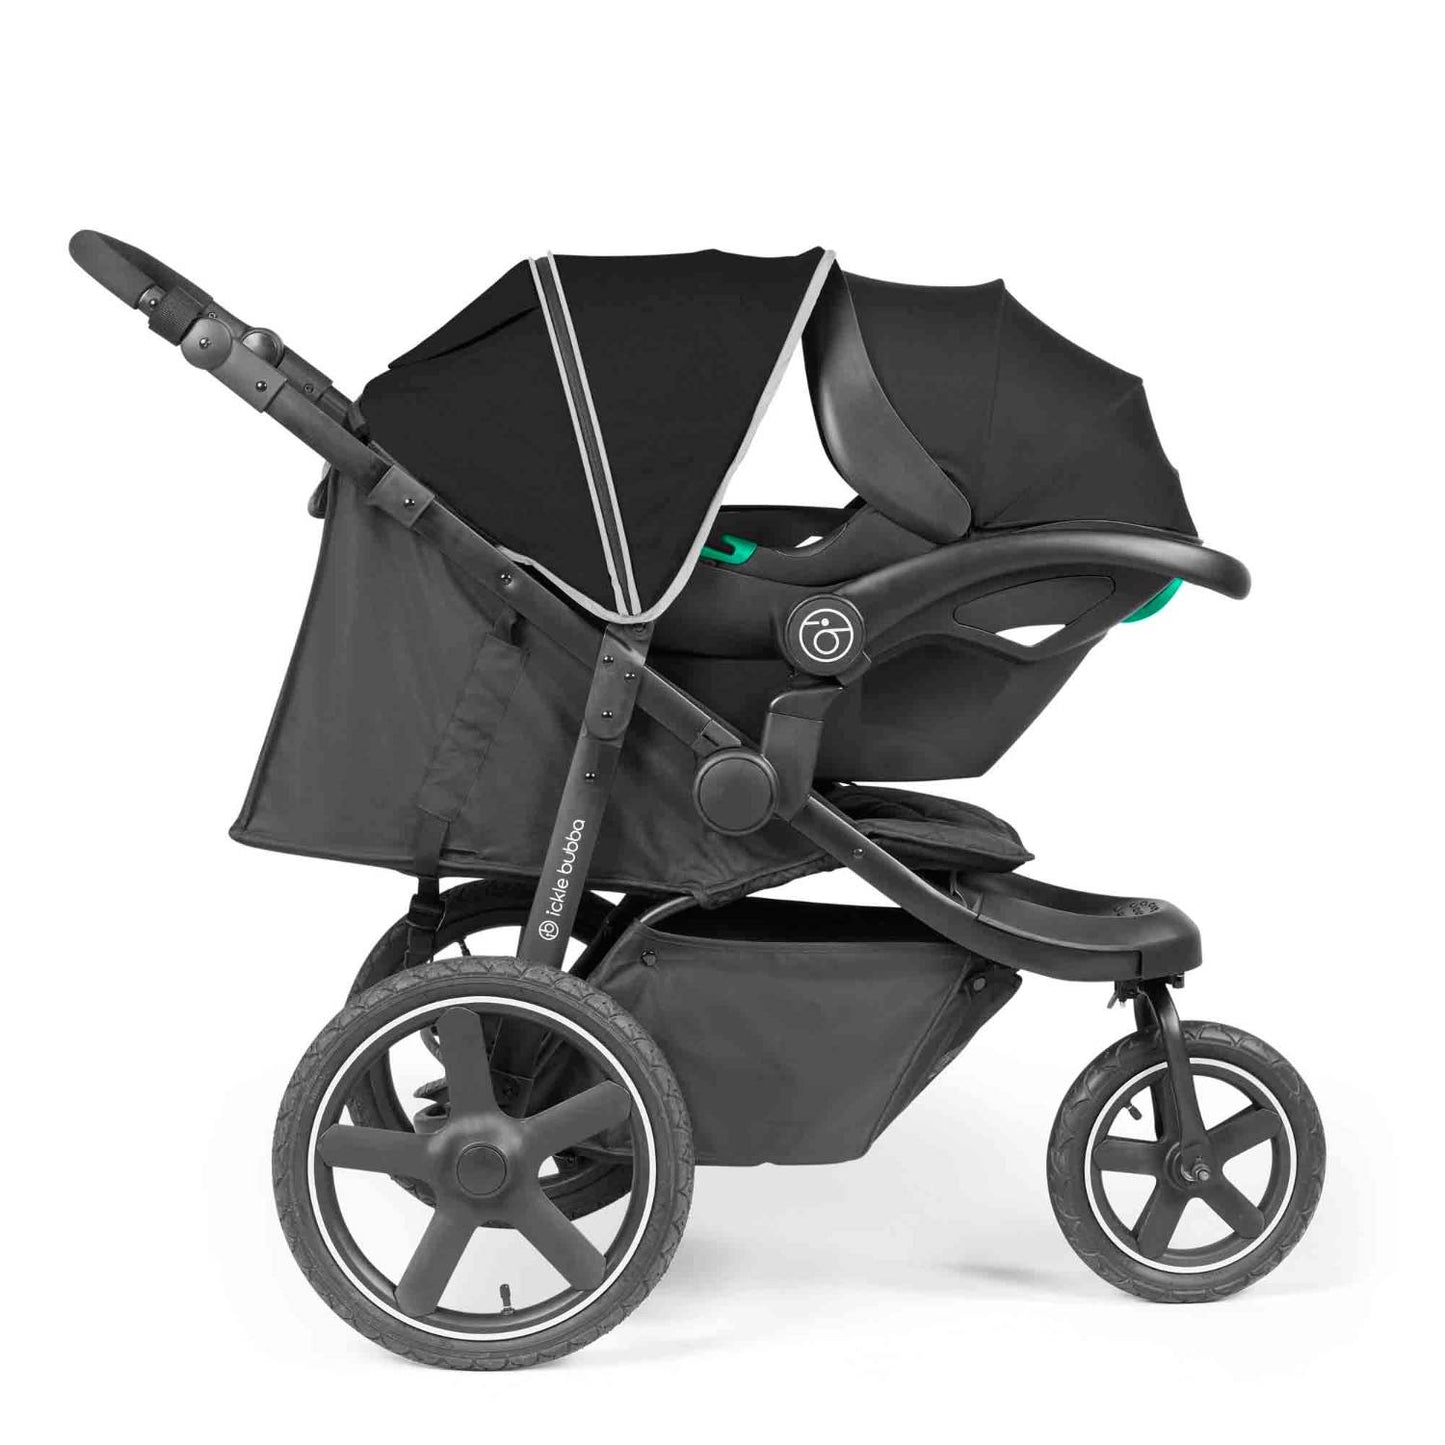 Ickle Bubba Venus Max Jogger Stroller in Black colour with Stratus i-Size car seat attached